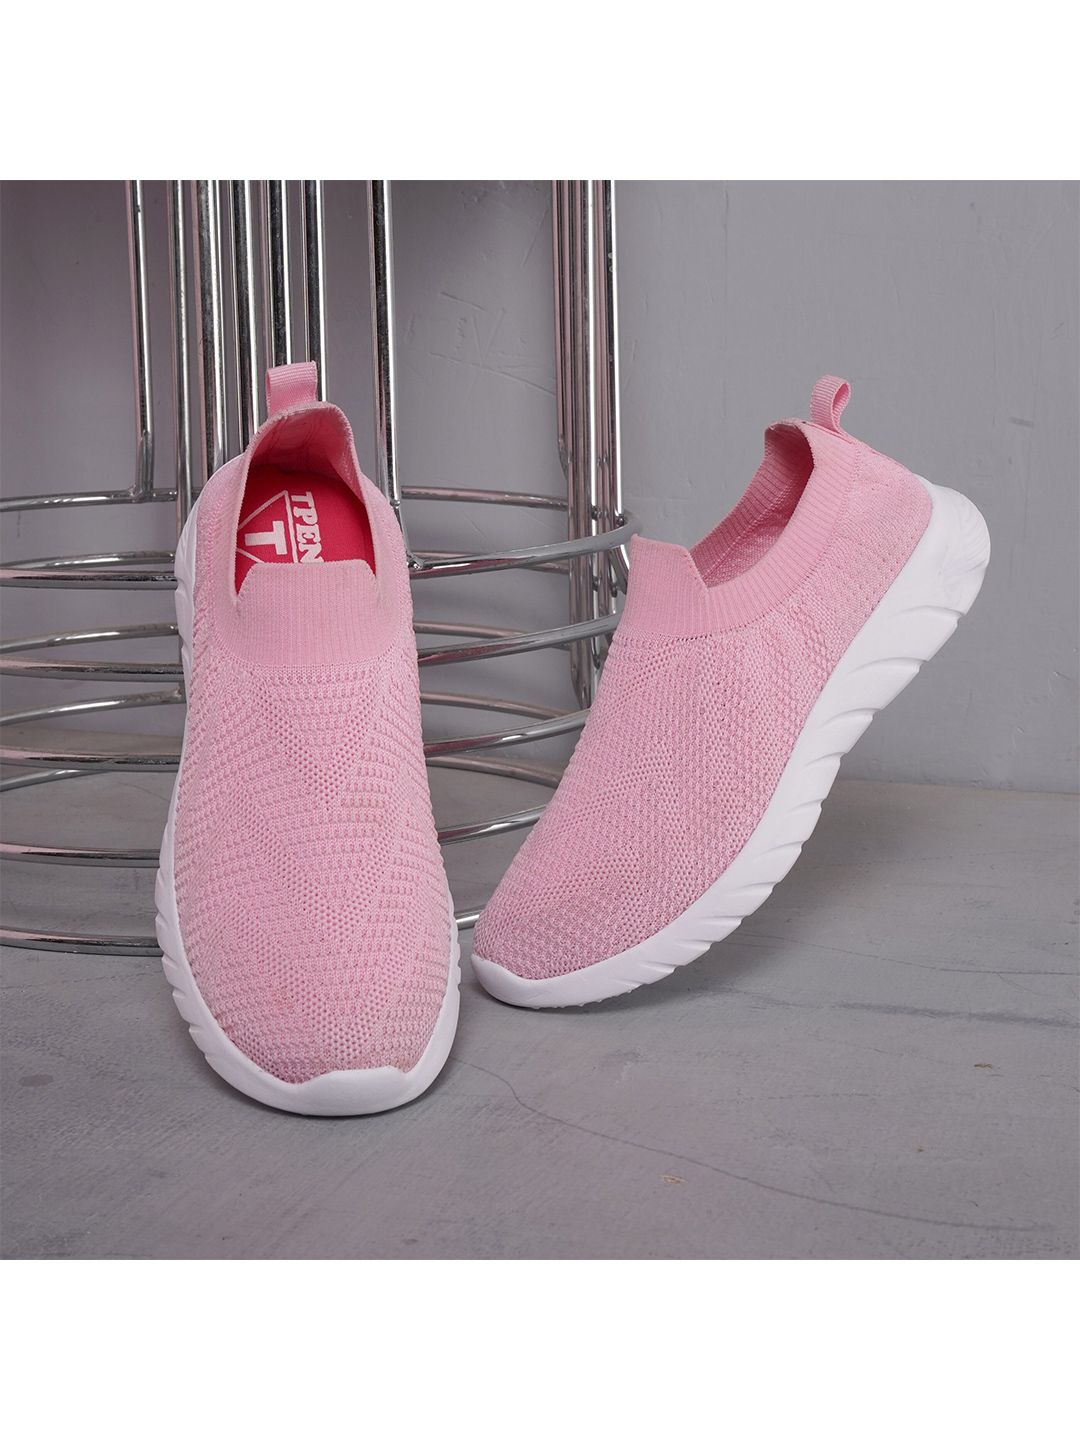 TPENT Women Pink Mesh Running Non-Marking Shoes Price in India